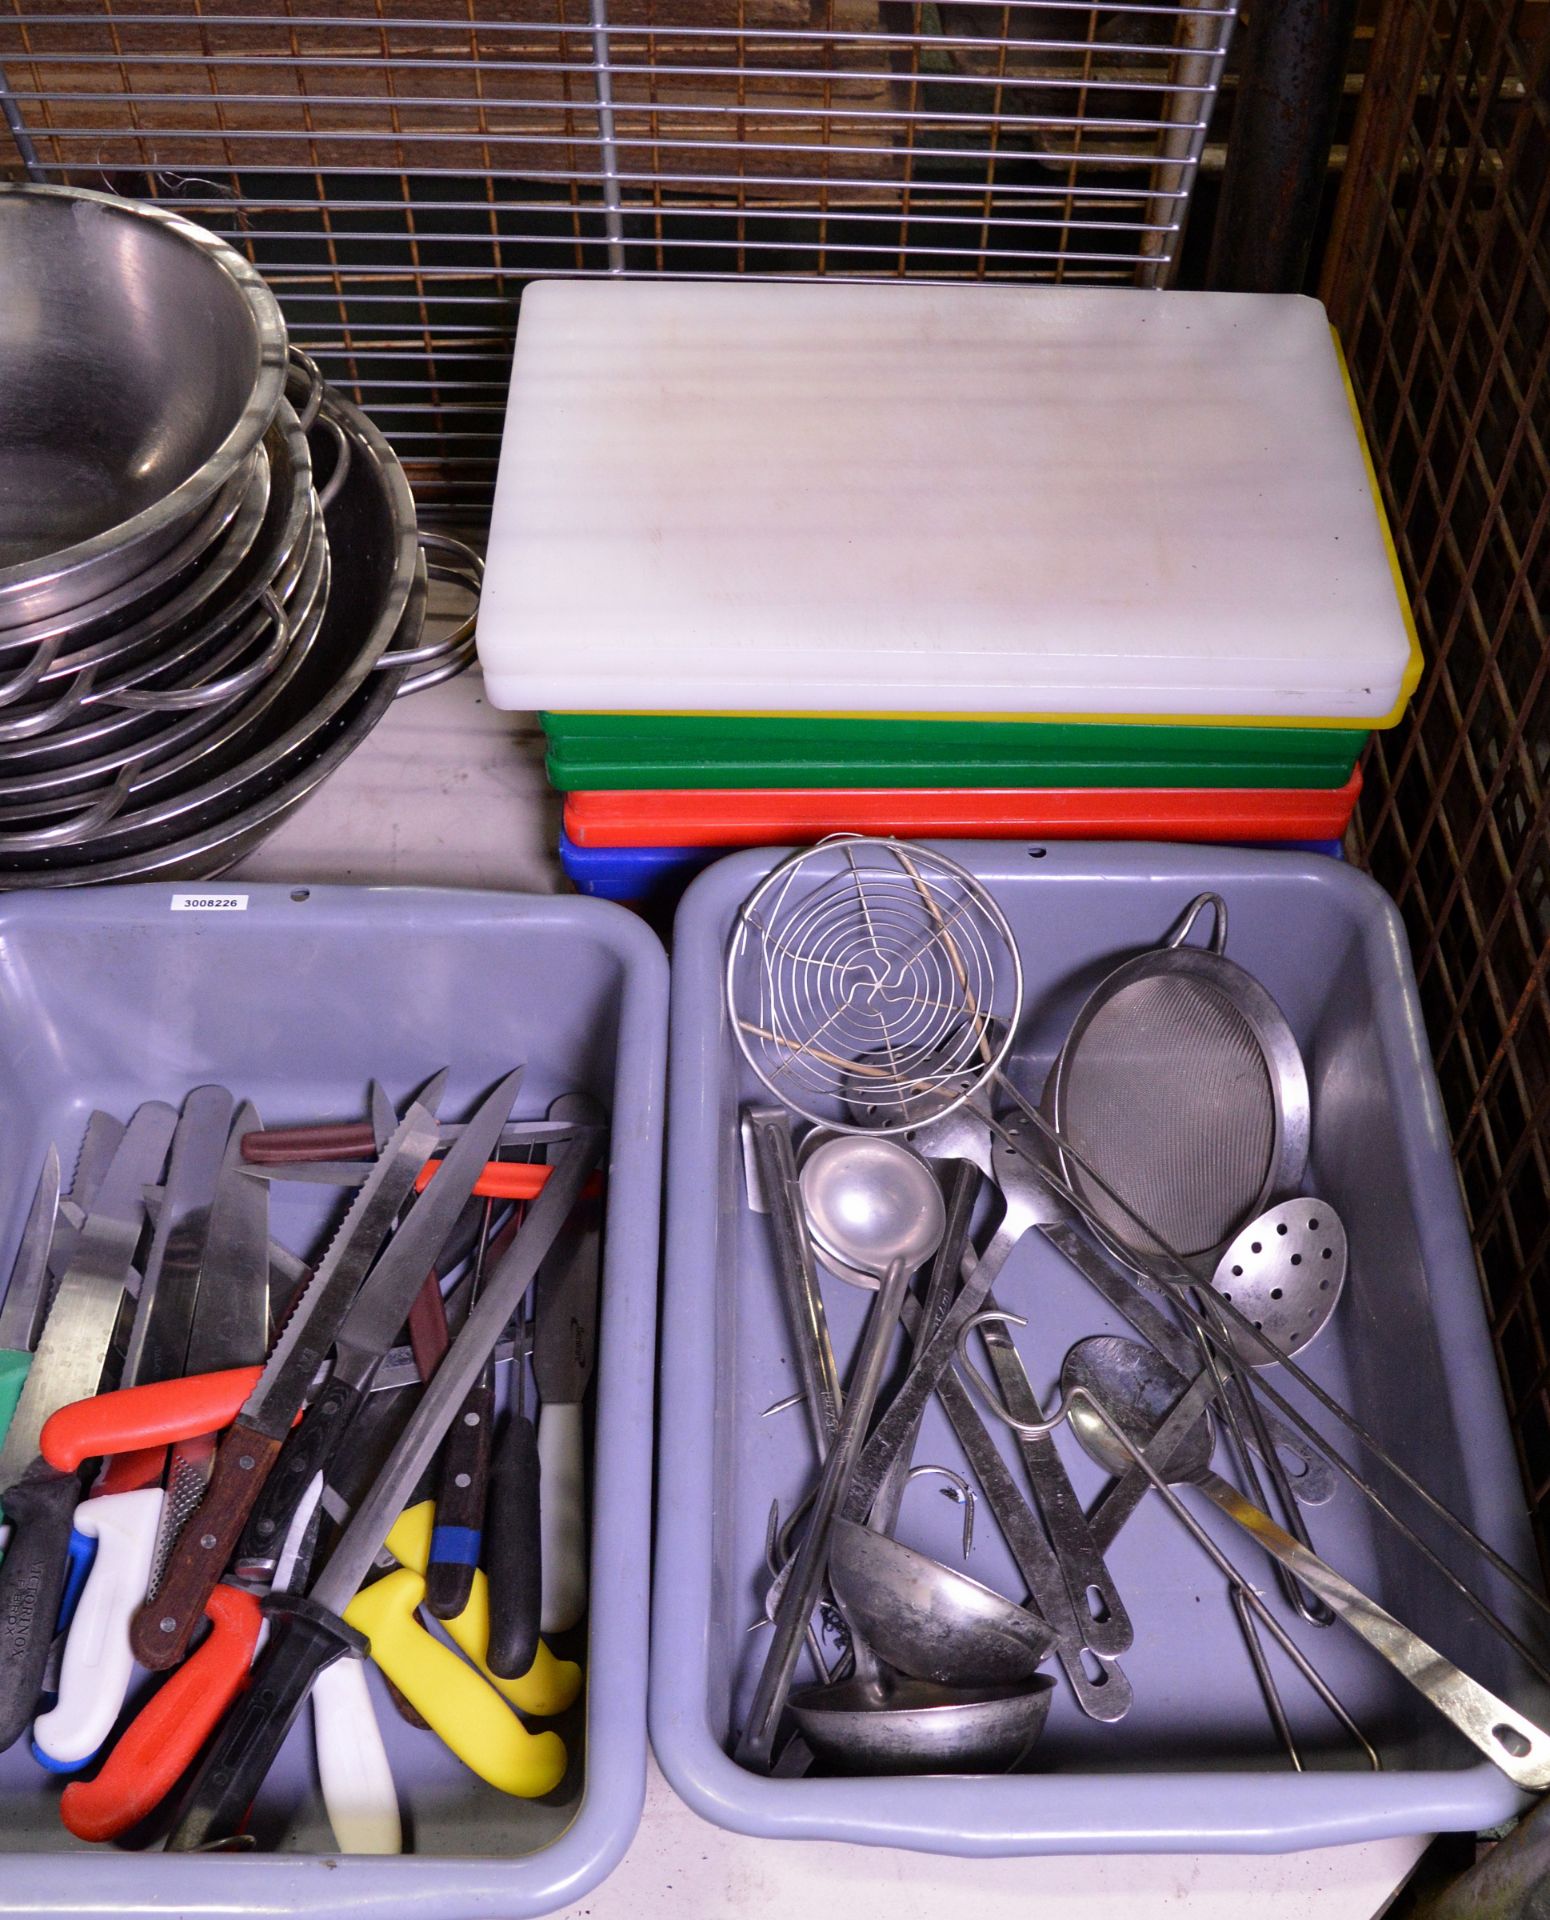 Various Catering Equipment - Collinders, Utensils, Chopping Boards, Catering Knives - Image 3 of 3